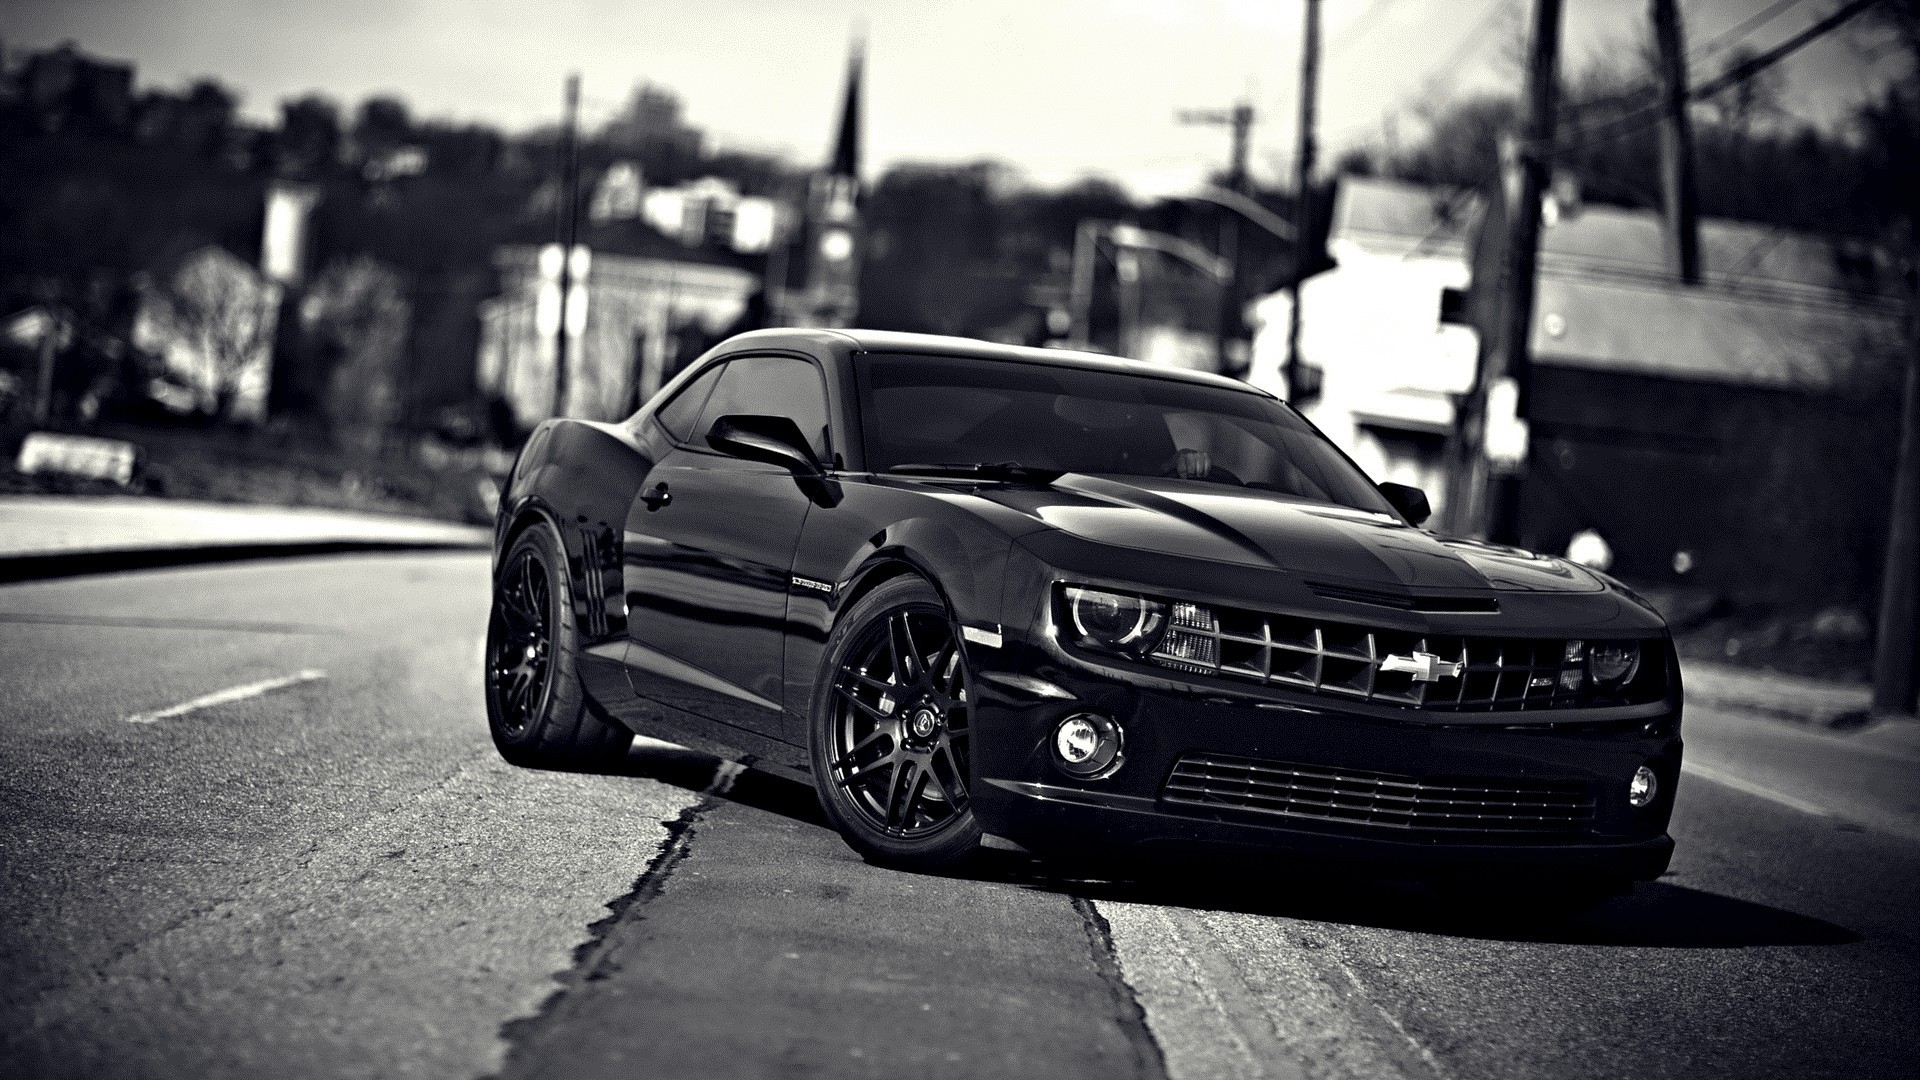 Chevrolet Camaro, Car, Muscle Cars, Black, Coupe Wallpaper